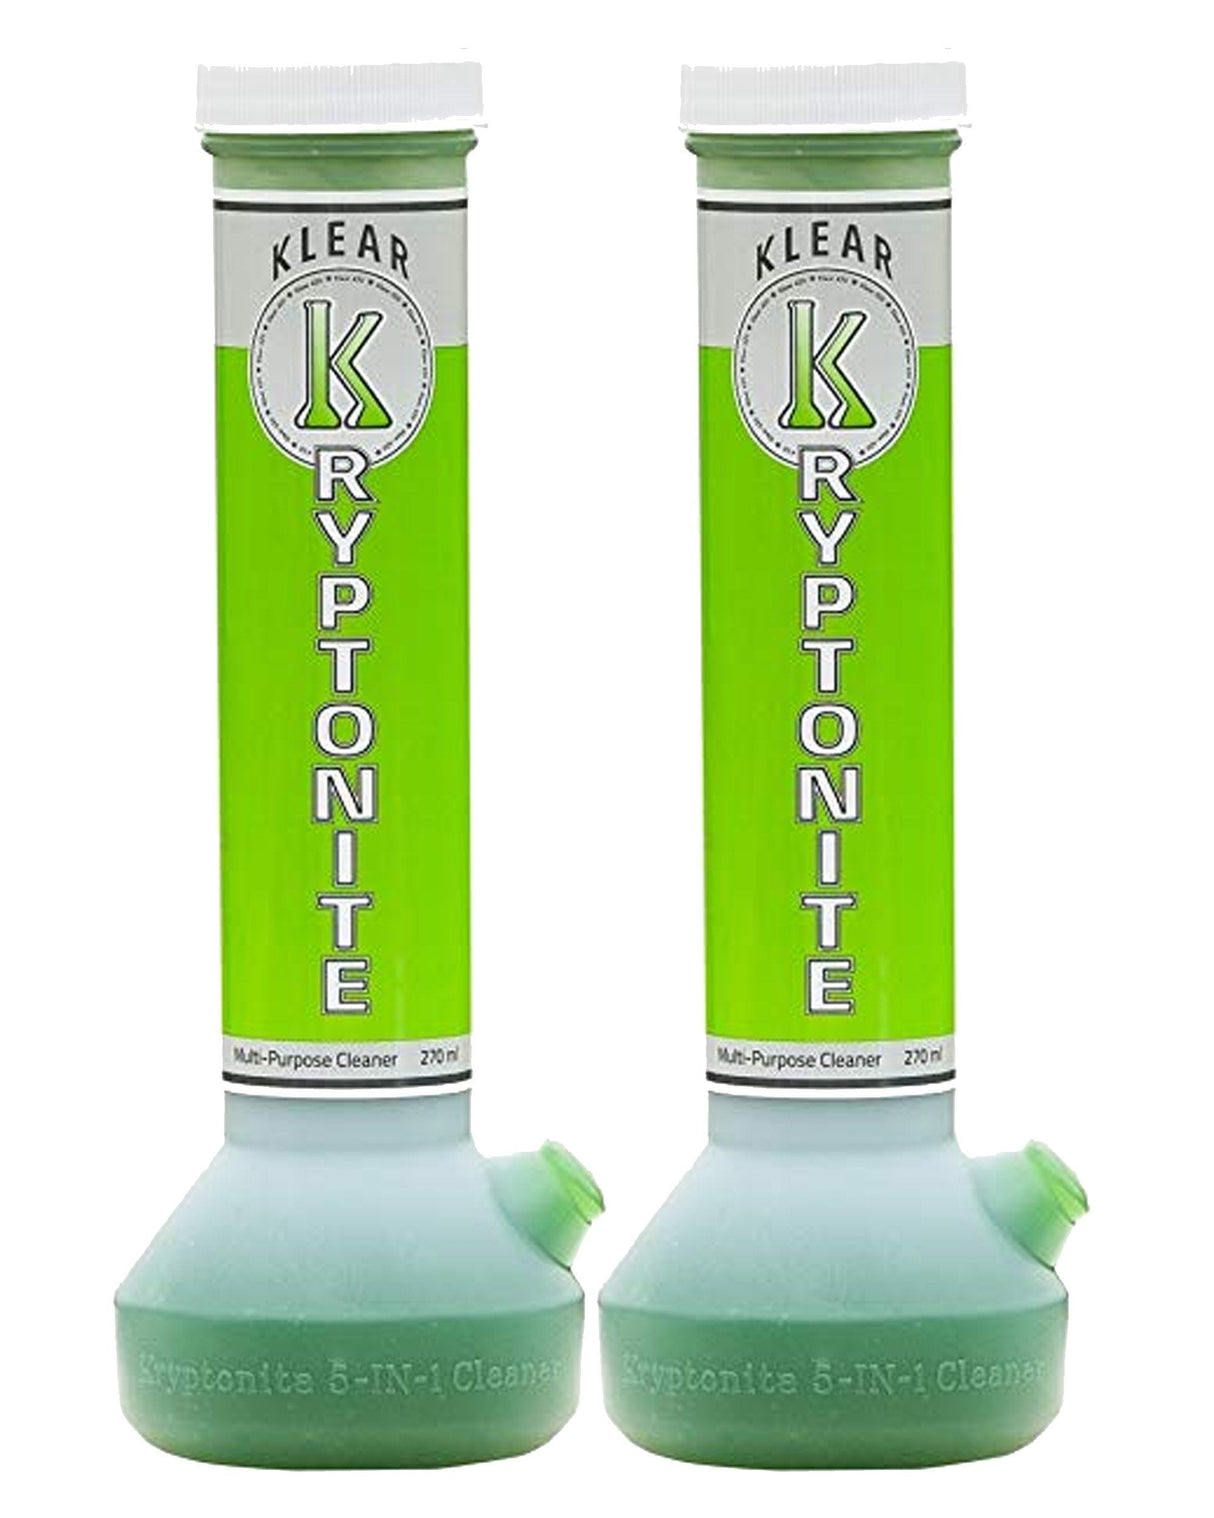 Klear Kryptonite Cleaner 2-Pack, front view on white background, effective multi-purpose cleaning solution